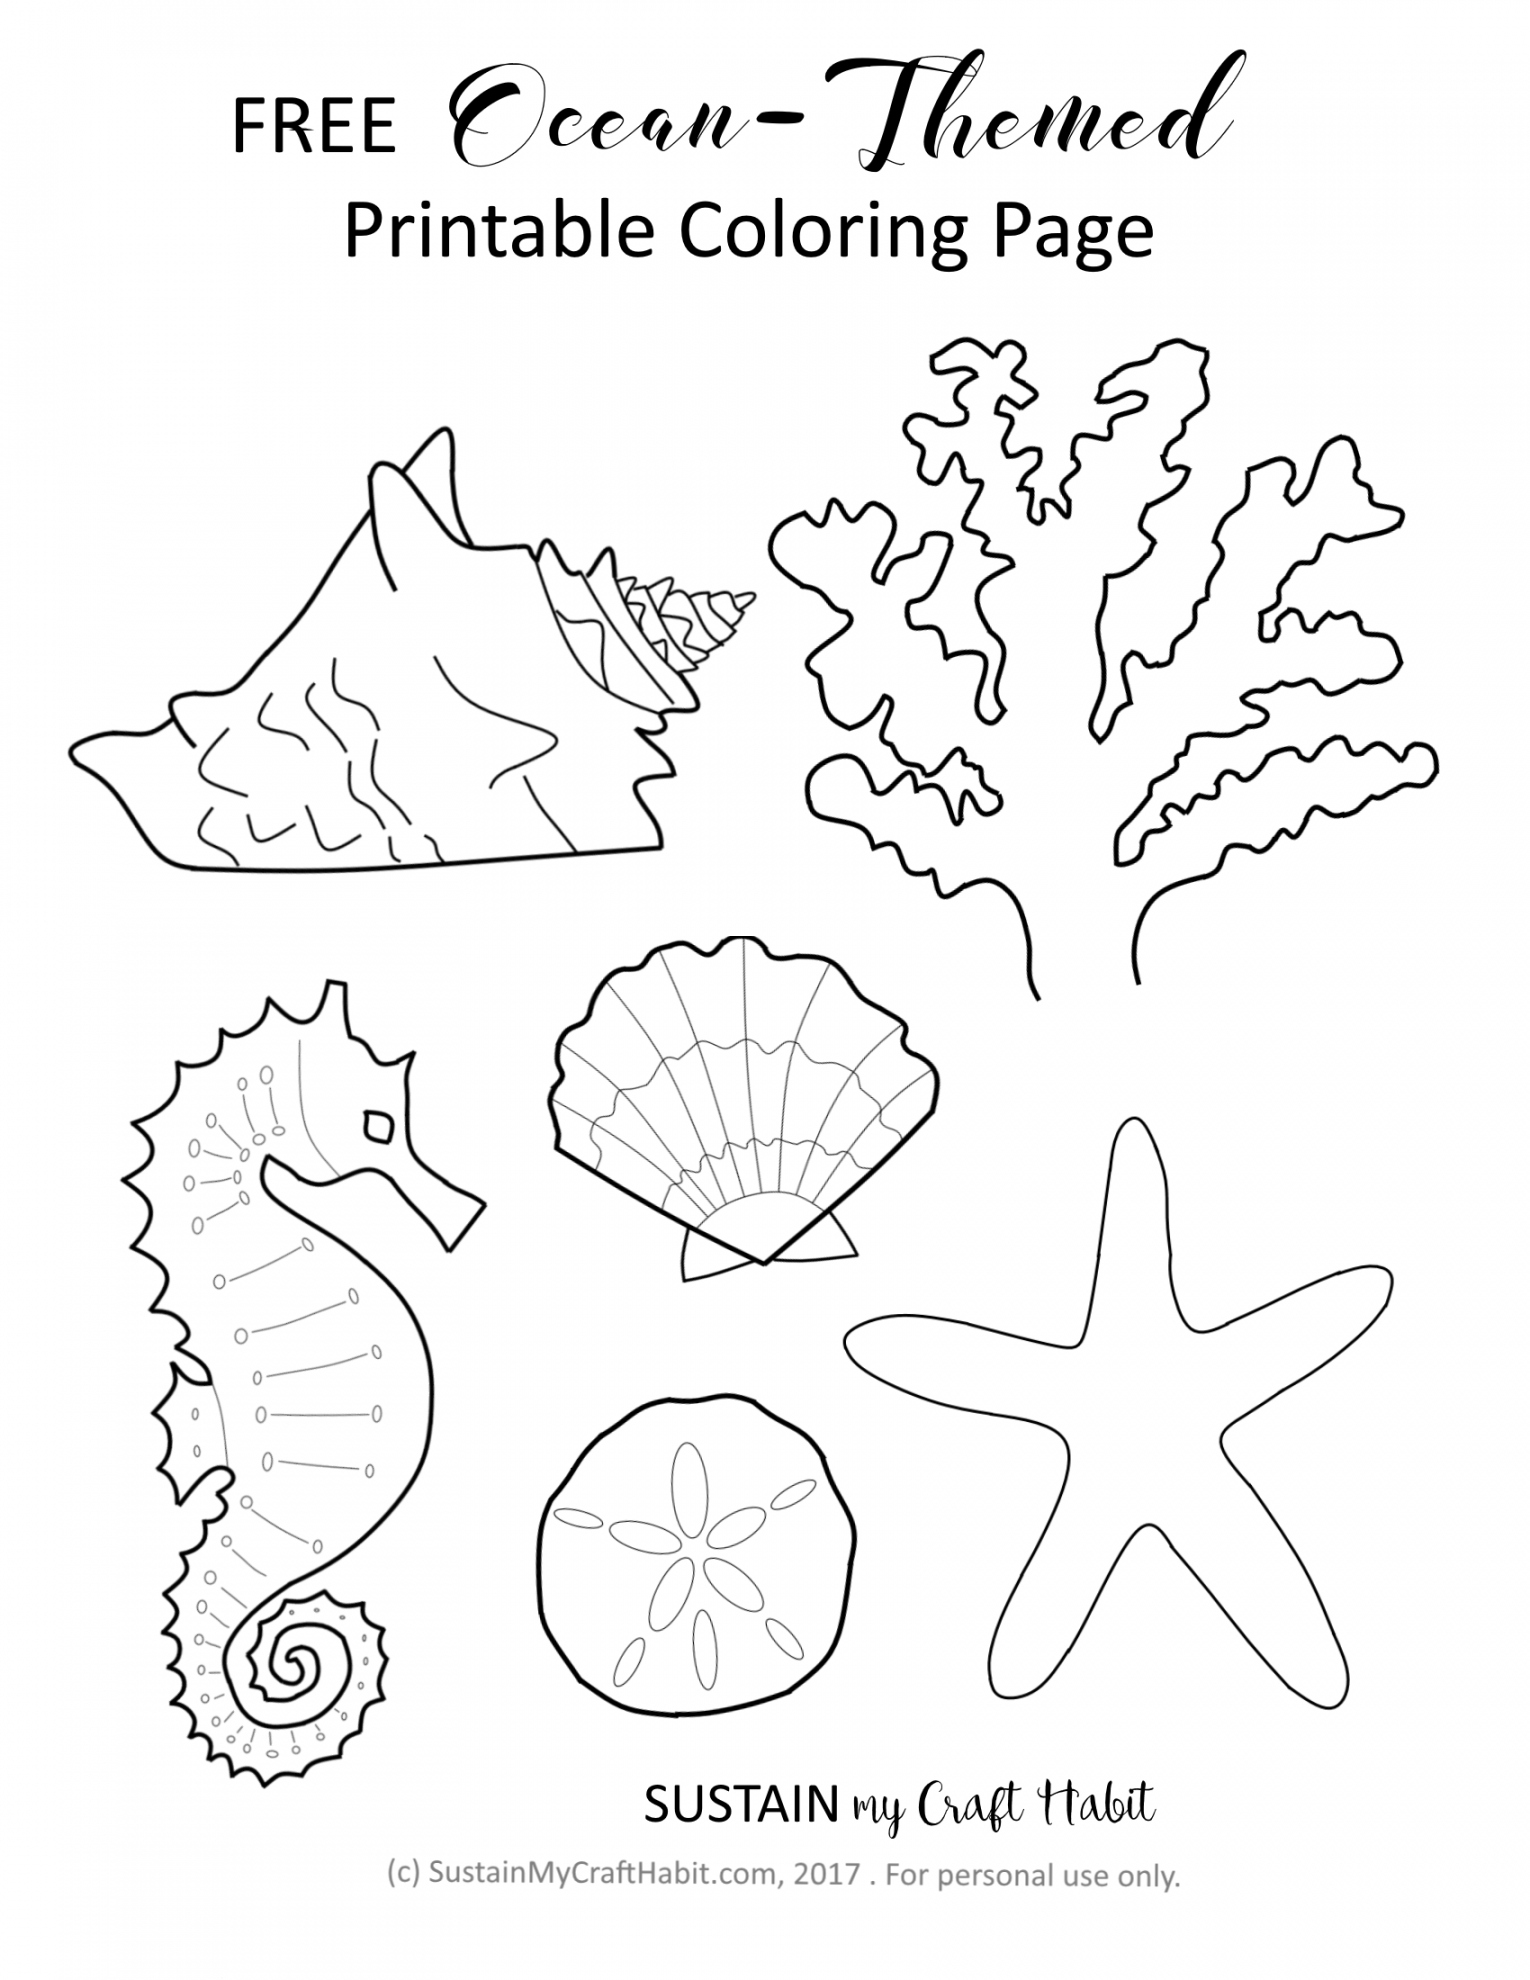 Free Ocean-Themed Coloring Page Printable! – Sustain My Craft Habit - FREE Printables - Free Printable Ocean Coloring Pages